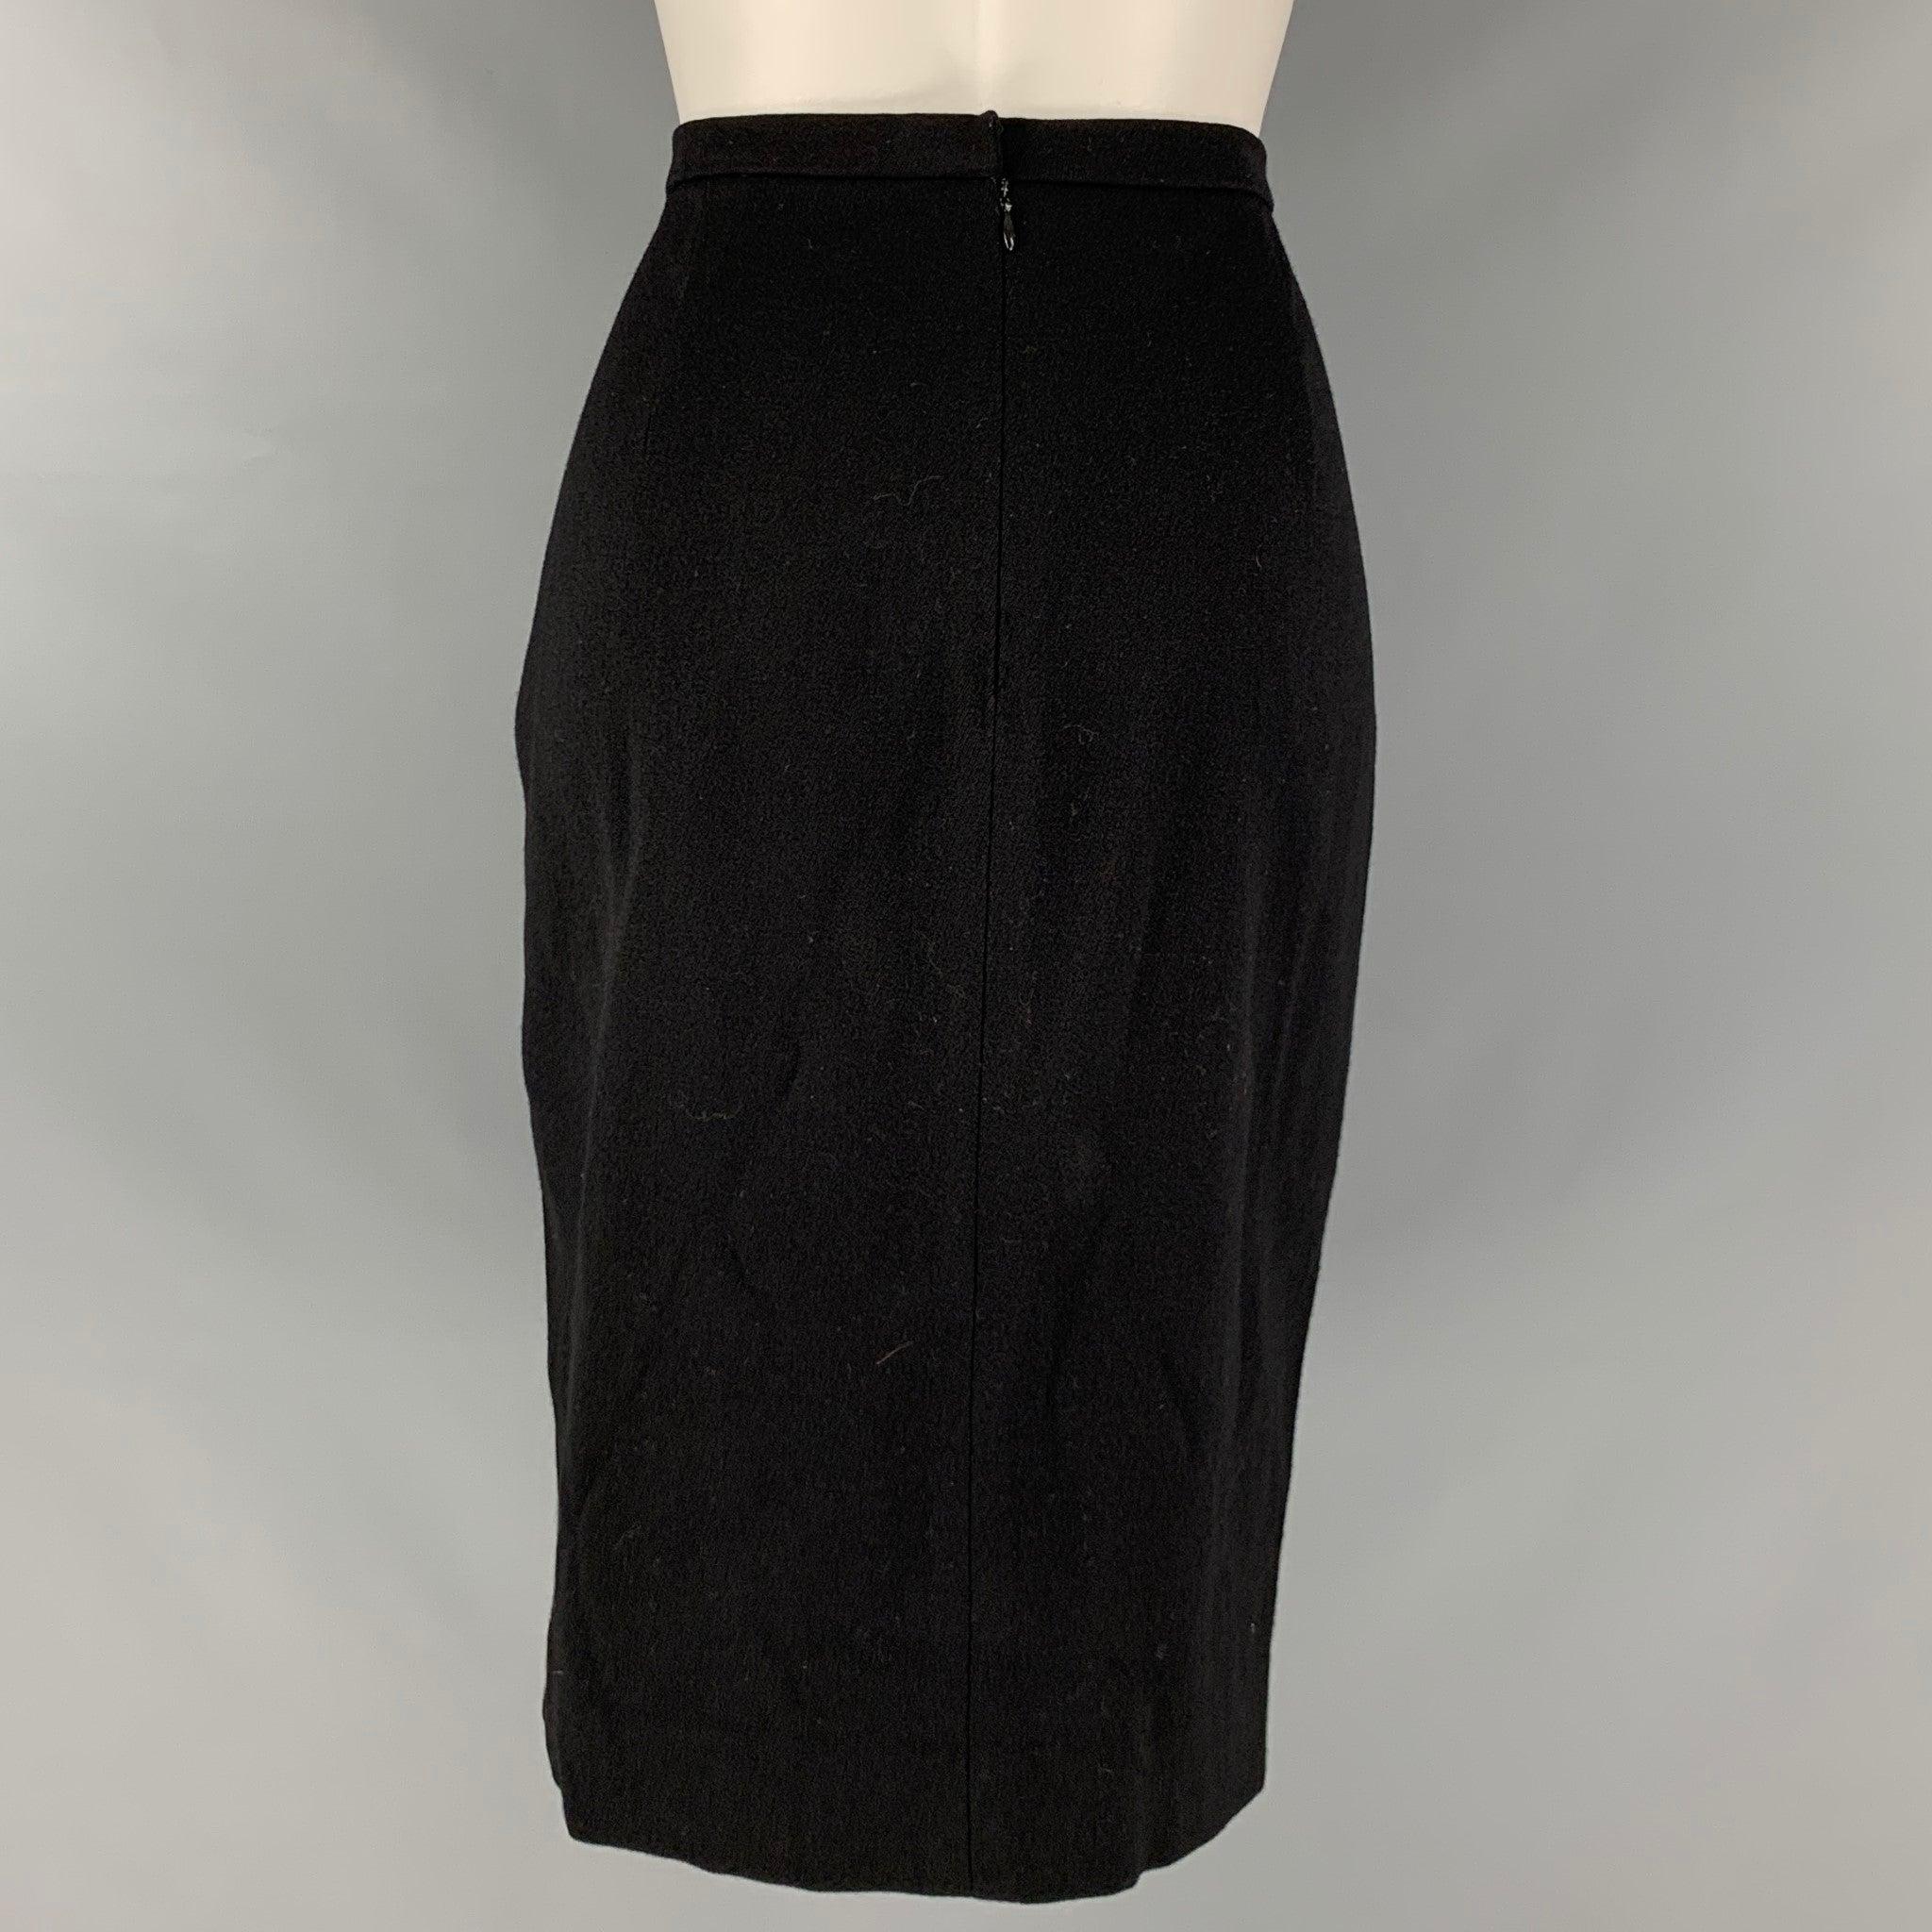 DONNA KARAN skirt comes in a black wool and lycra knit material featuring a pencil style and a back zip up closure. Made in USA.Very Good Pre-Owned Condition. Moderate signs of wear. 

Marked:   8 

Measurements: 
  Waist: 28 inches  Hip: 39 inches